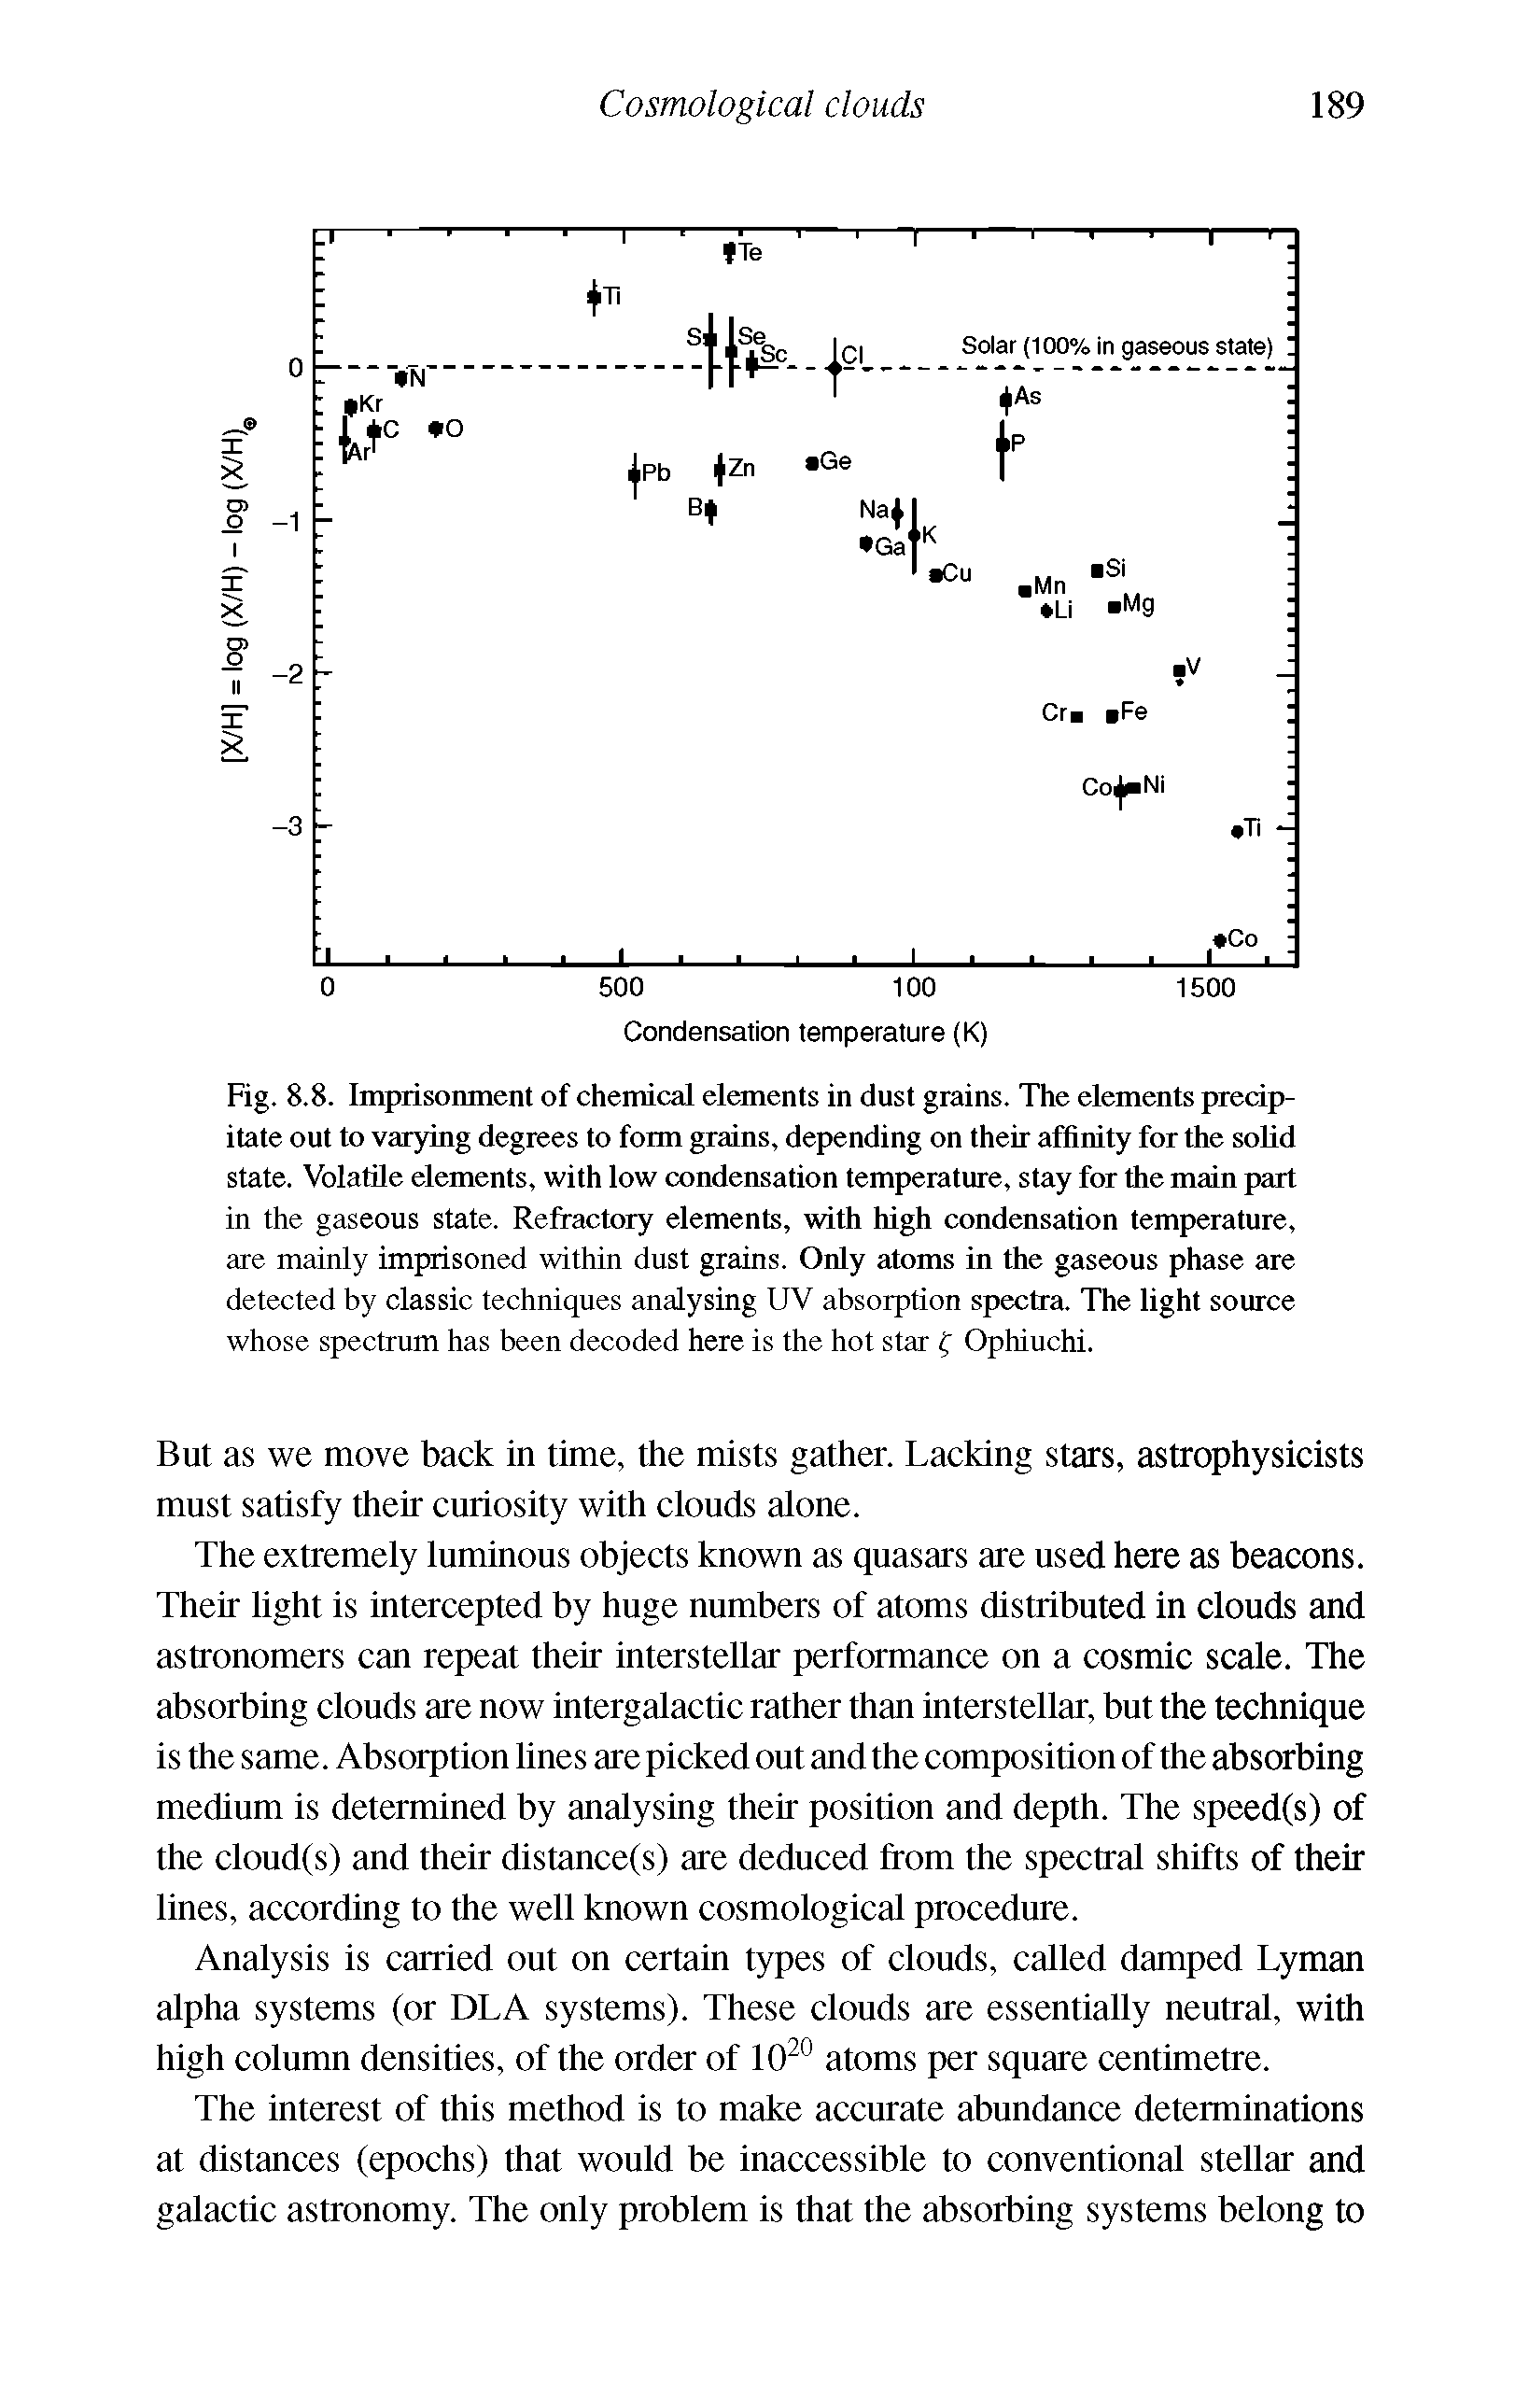 Fig. 8.8. Imprisonment of chemical elements in dust grains. The elements precipitate out to varying degrees to form grains, depending on their affinity for the solid state. Volatile elements, with low condensation temperature, stay for the main part in the gaseous state. Refractory elements, with high condensation temperature, are mainly imprisoned within dust grains. Only atoms in the gaseous phase are detected by classic techniques analysing UV absorption spectra. The light source whose spectrum has been decoded here is the hot star f Ophiuchi.